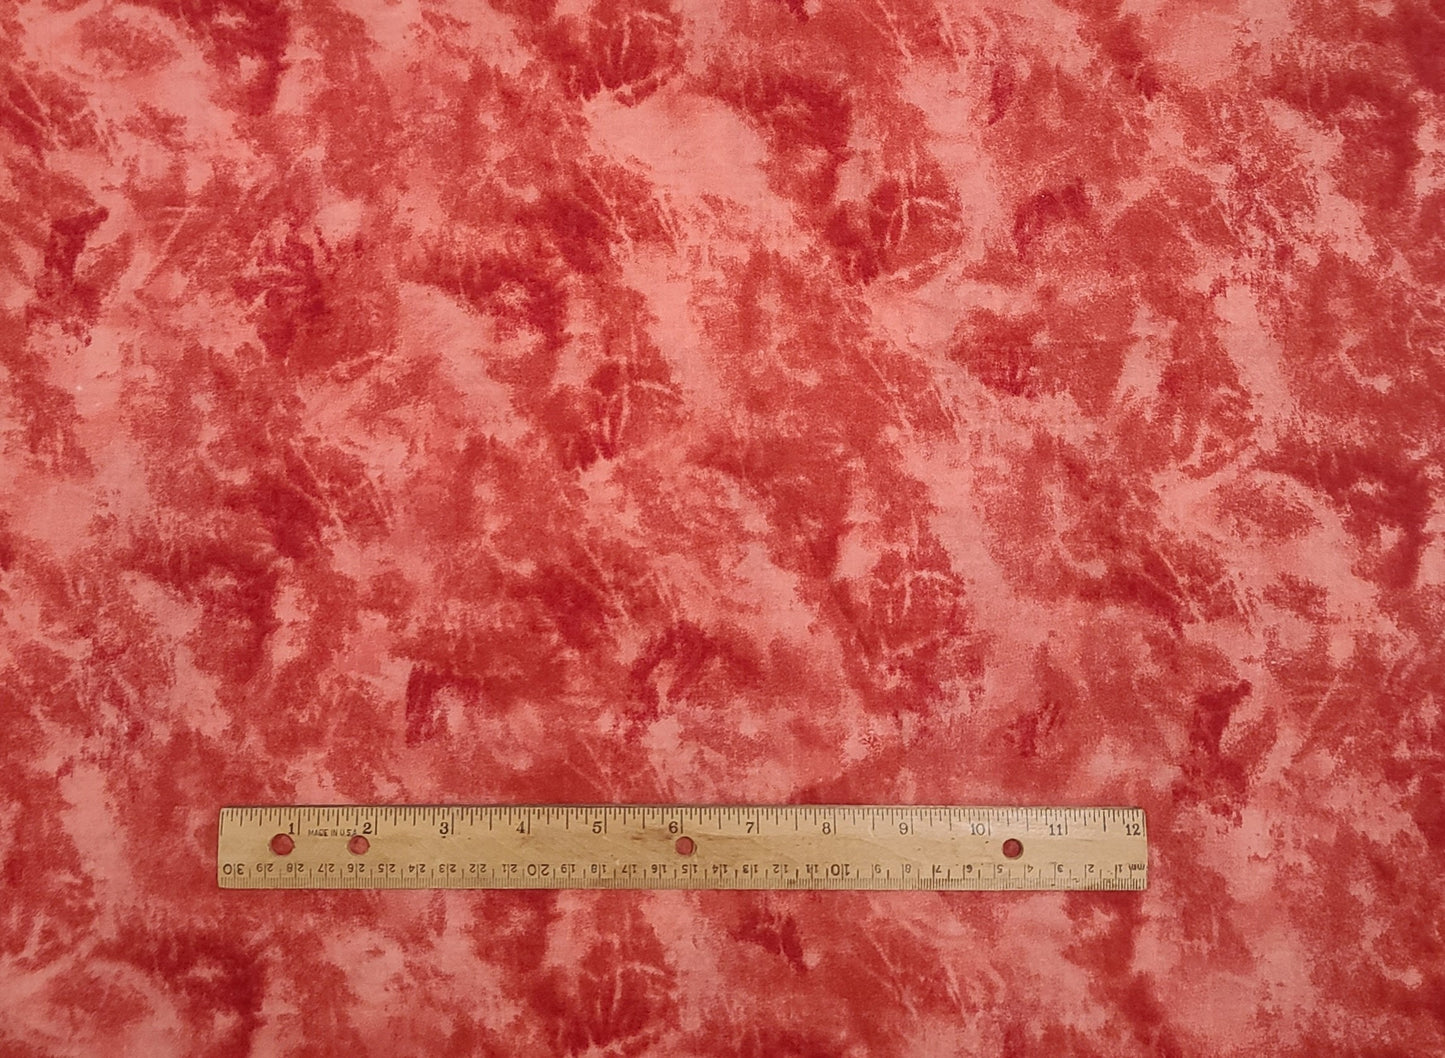 Red and Pink "Marbled" Tie-Dye Fabric - Selvage to Selvage Print